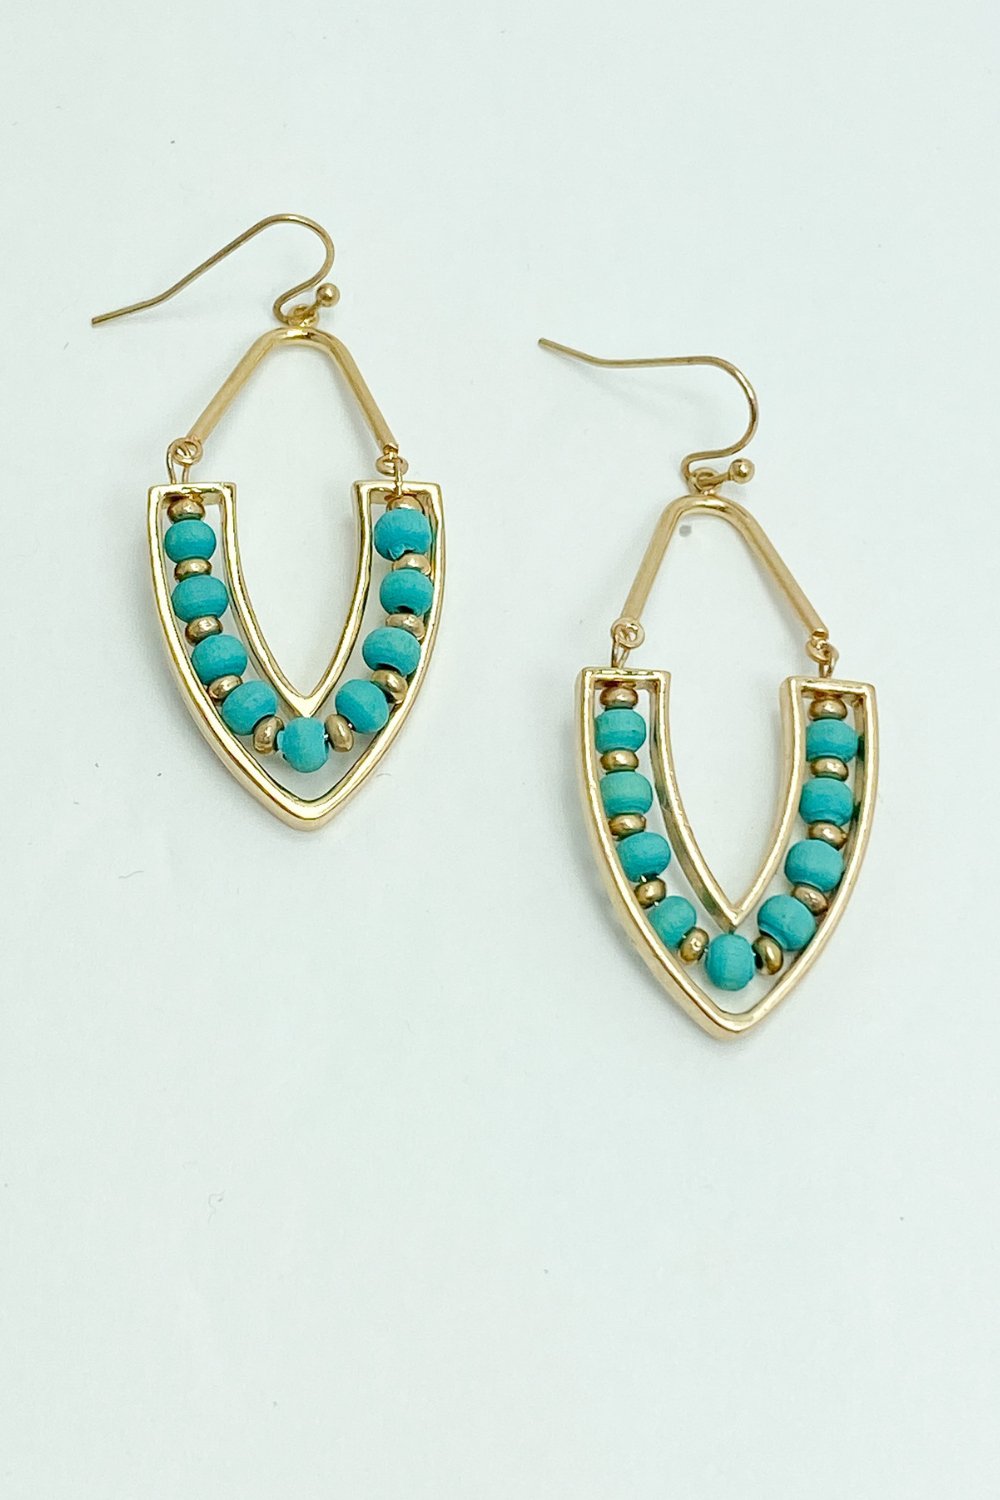 Turquoise & Gold Beaded Drop Earrings - Lucy Doo